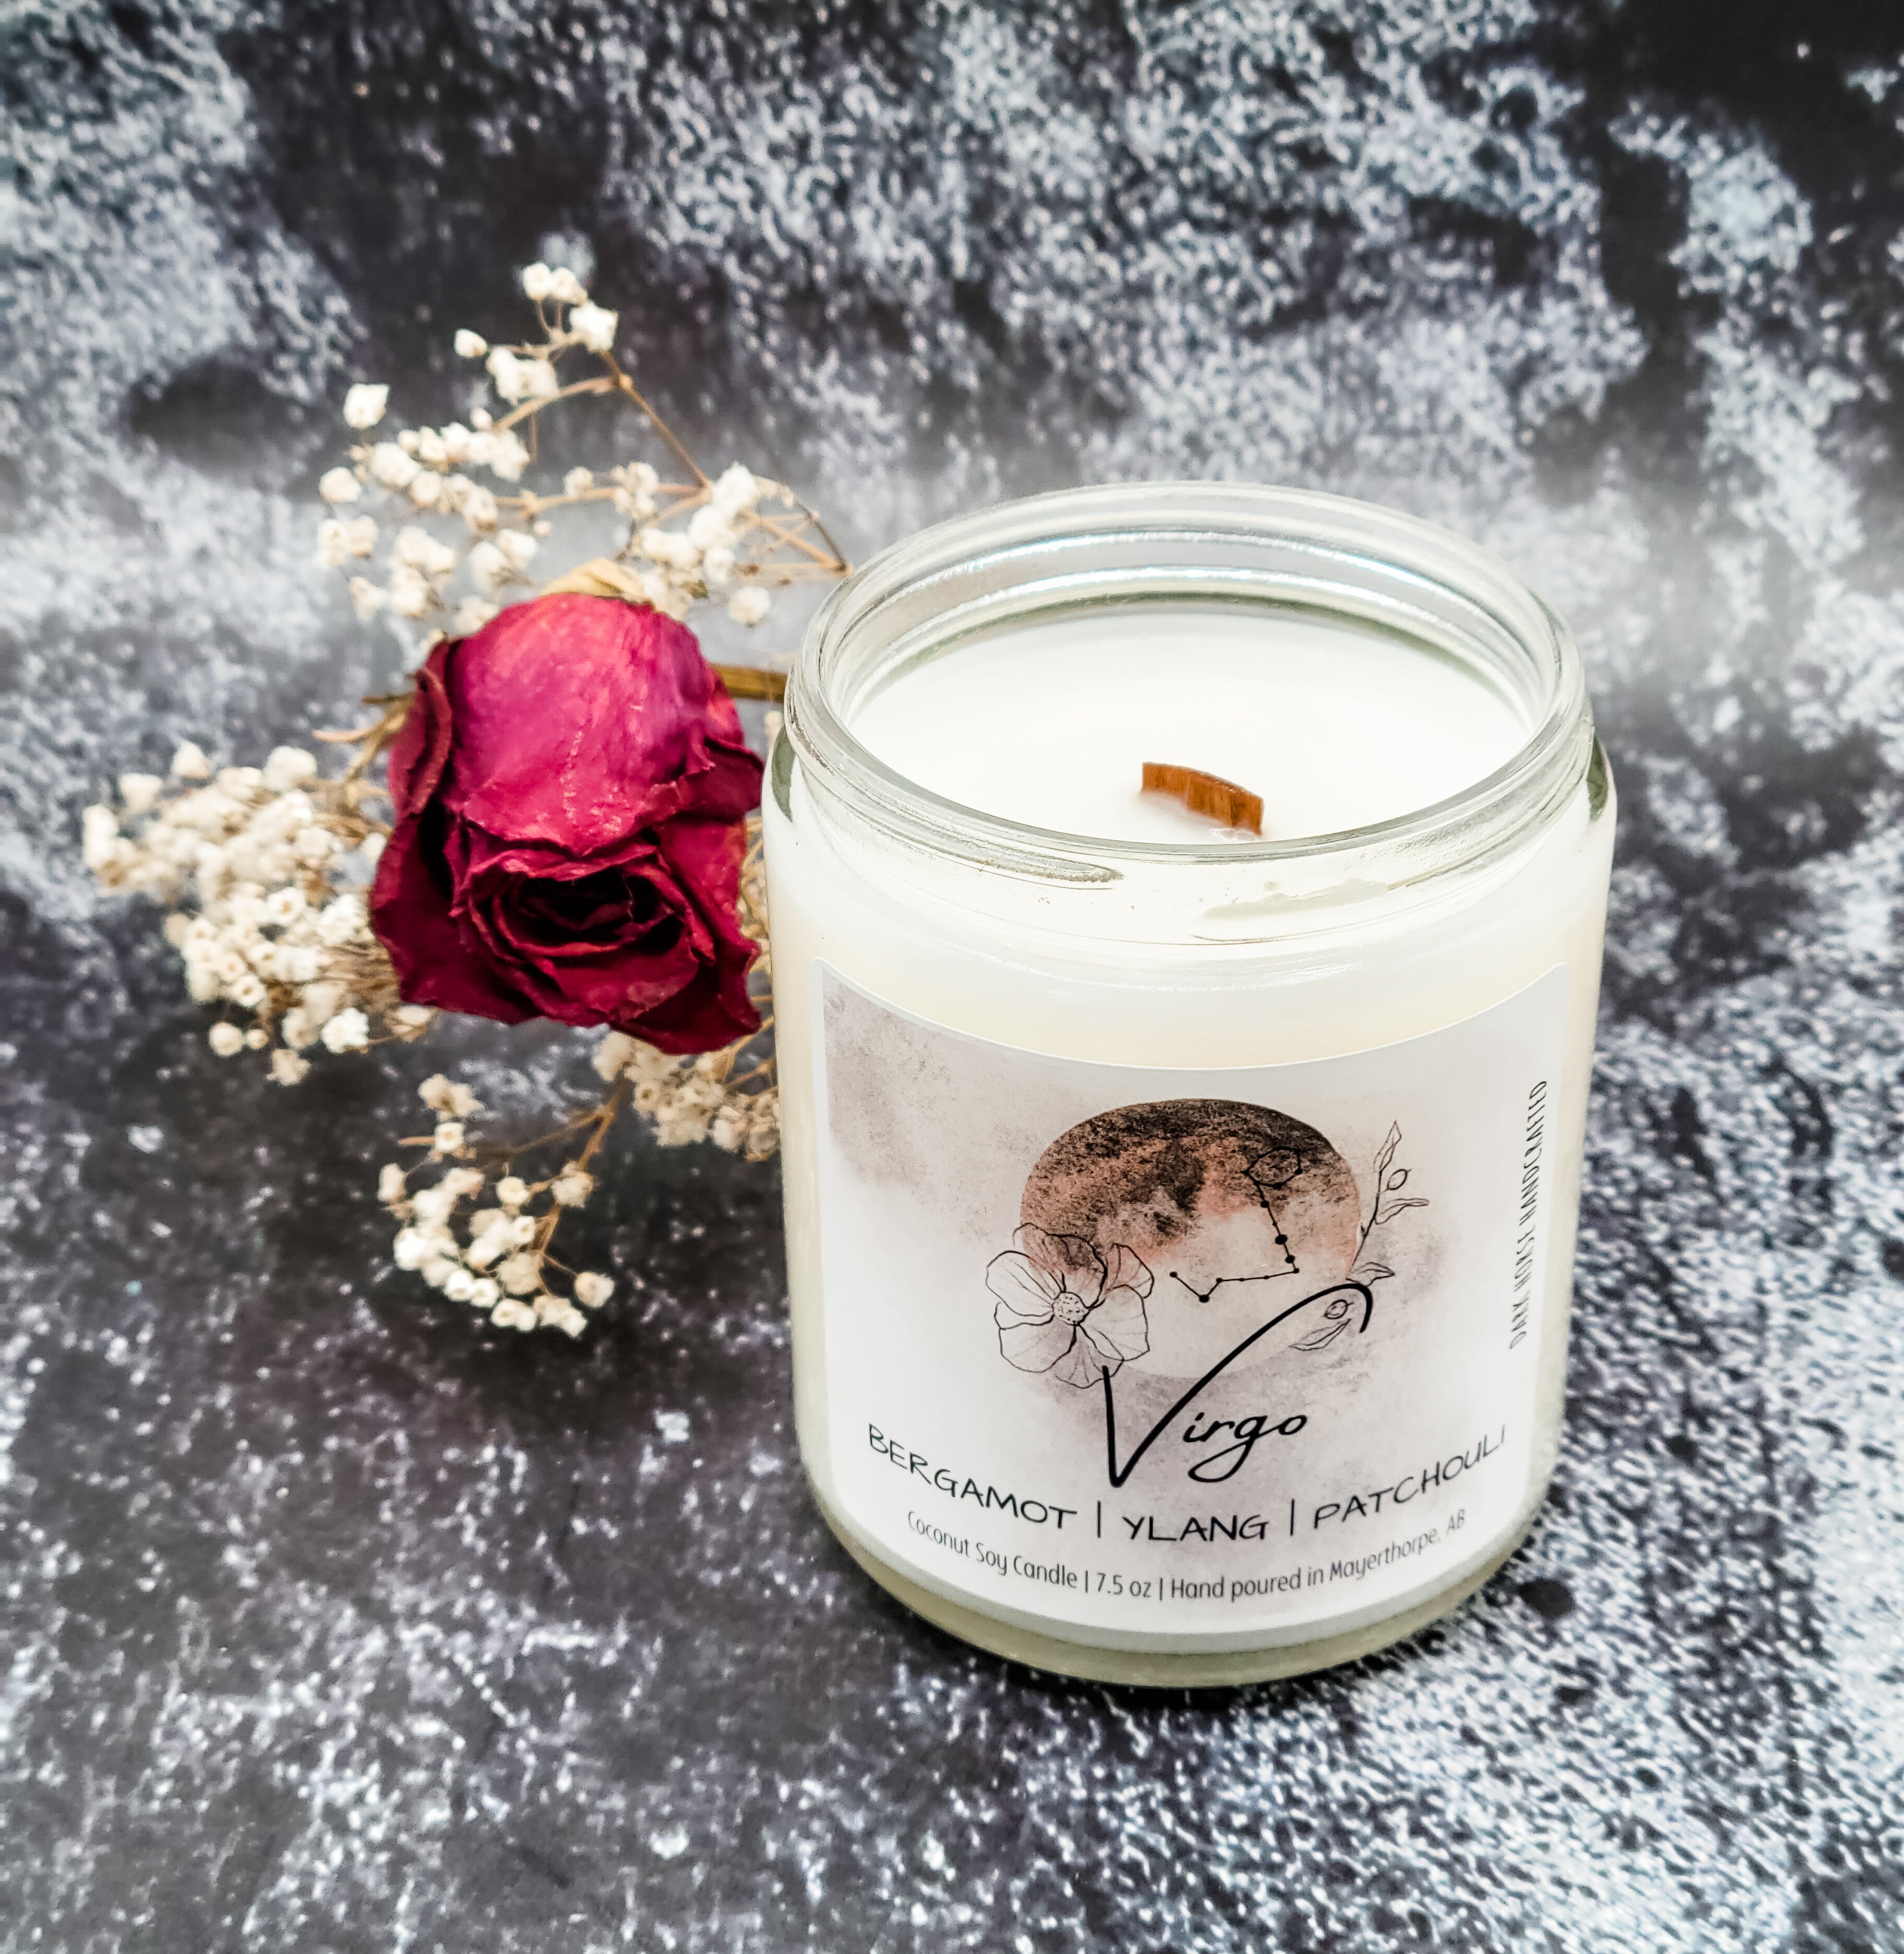 Virgo astrological candle with wood wick